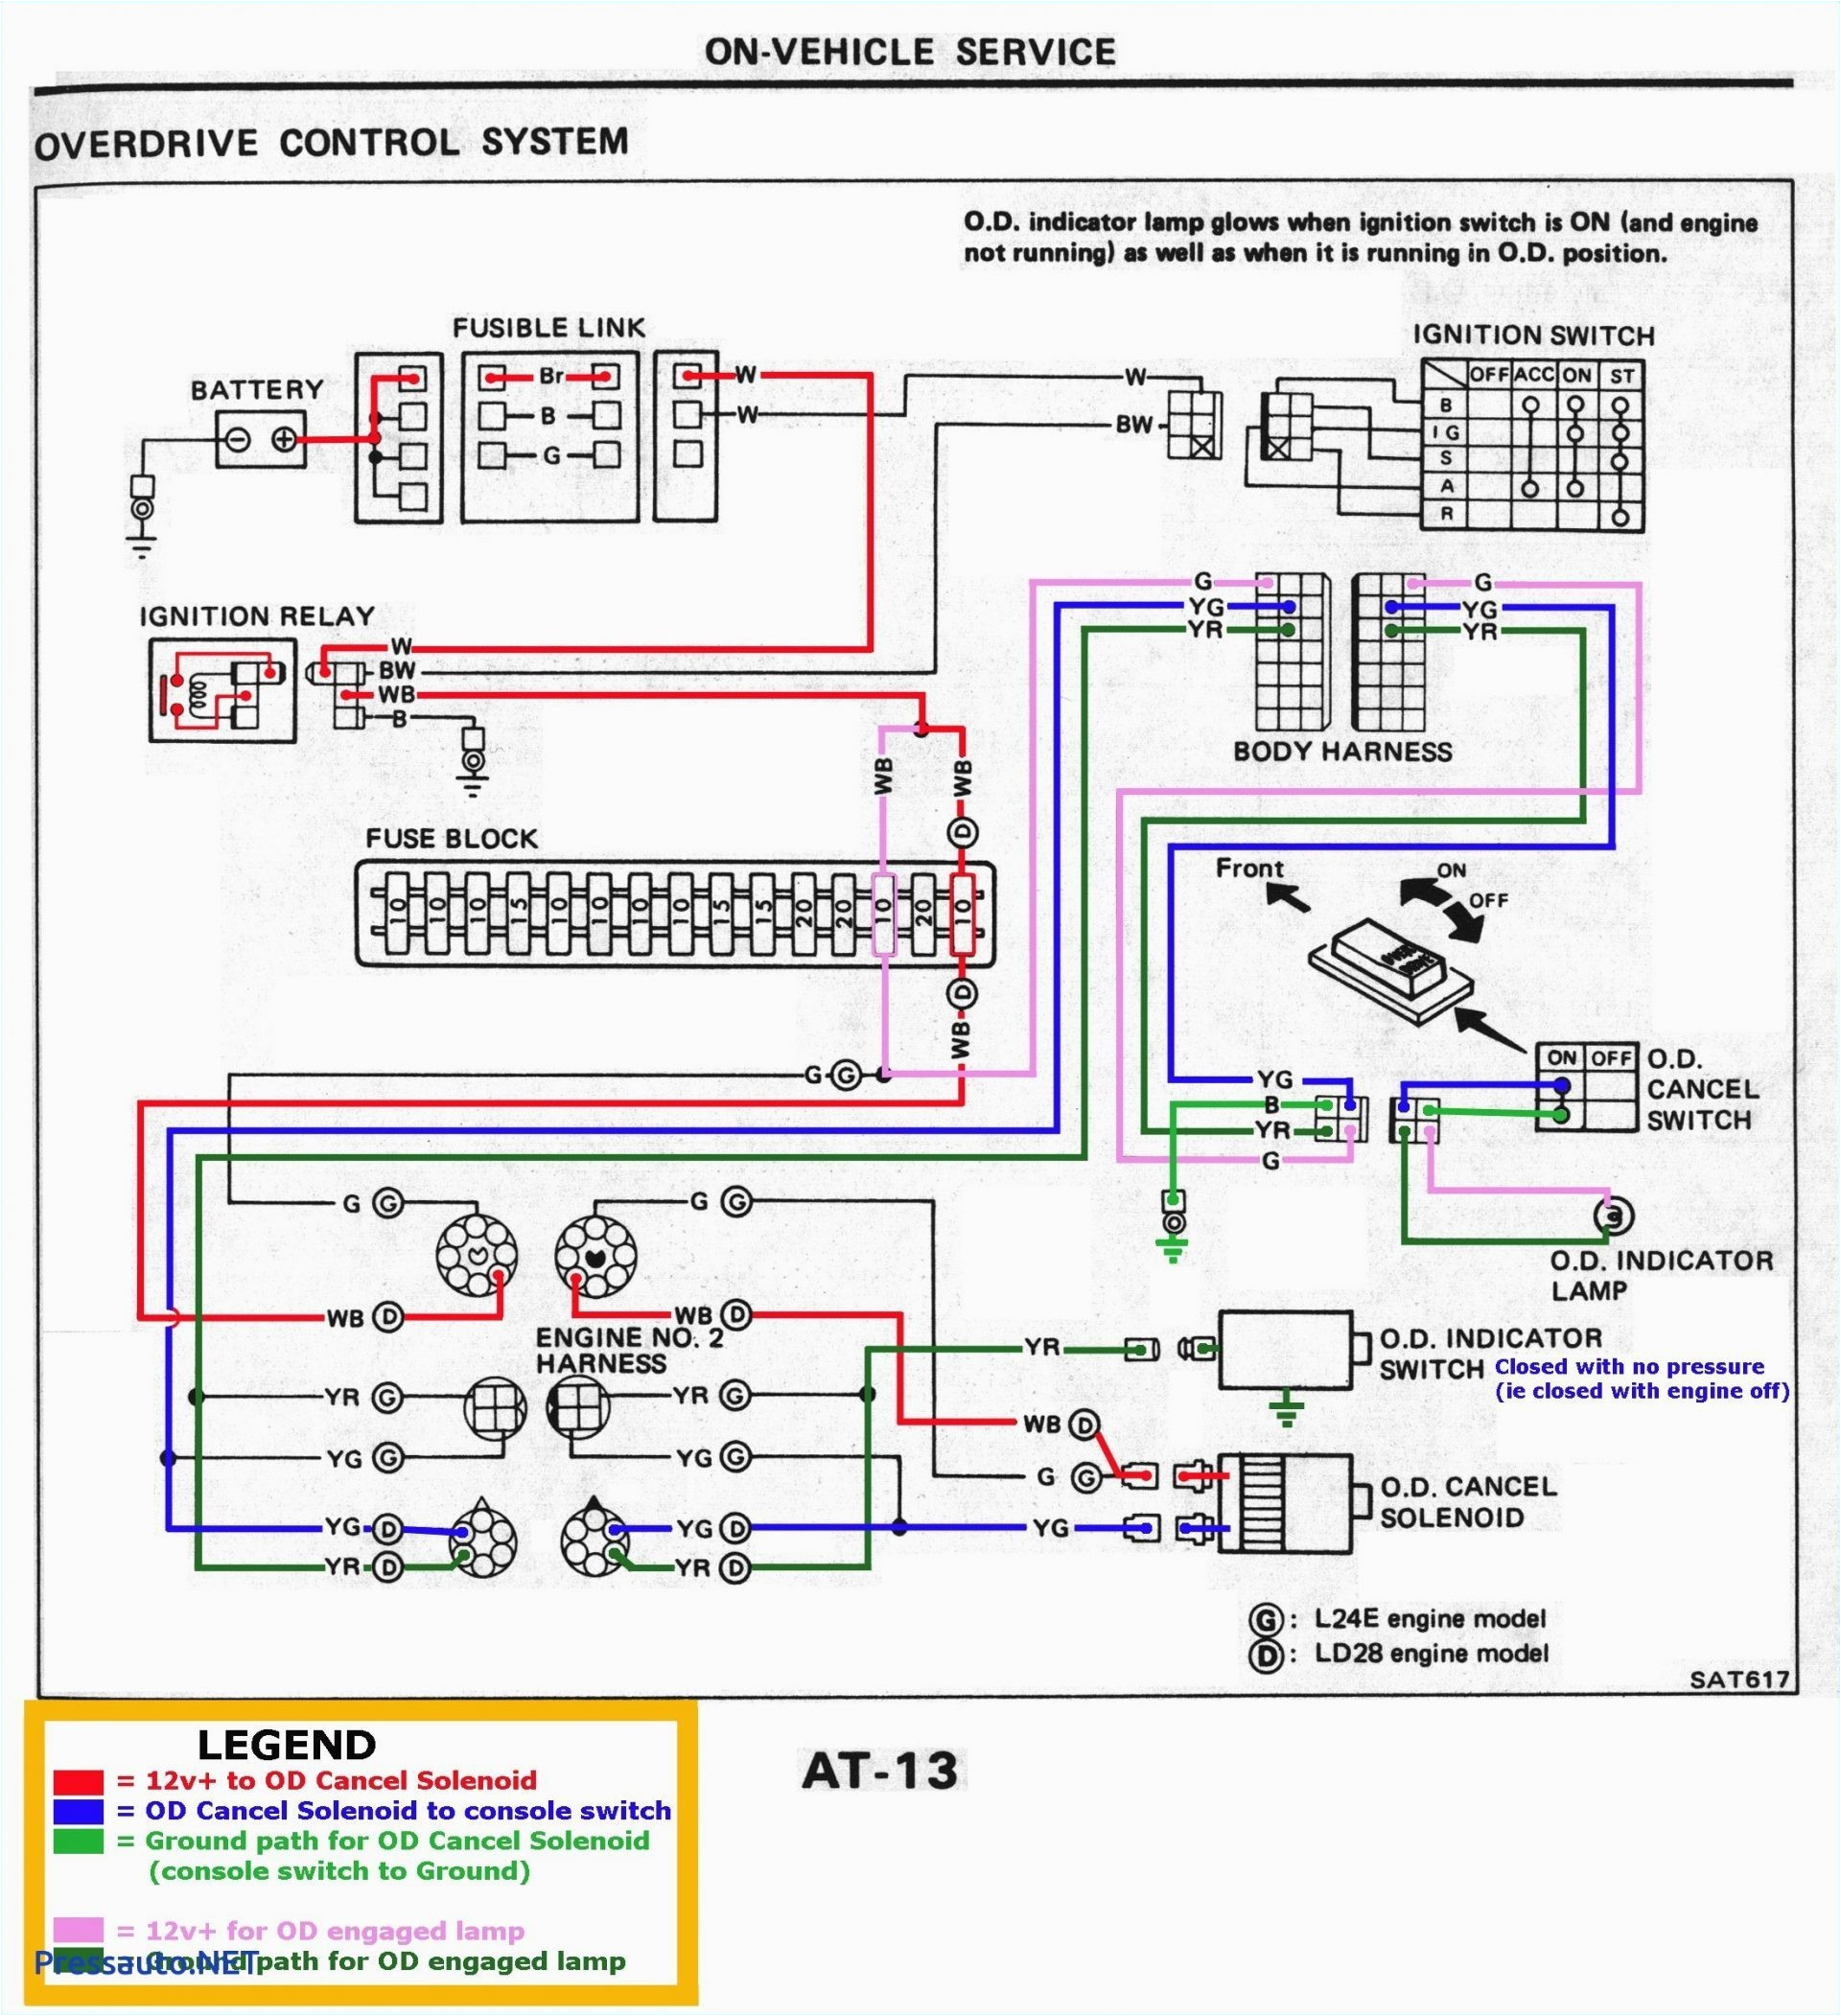 ford wiring color codes wiring diagram wiring harness diagram color code